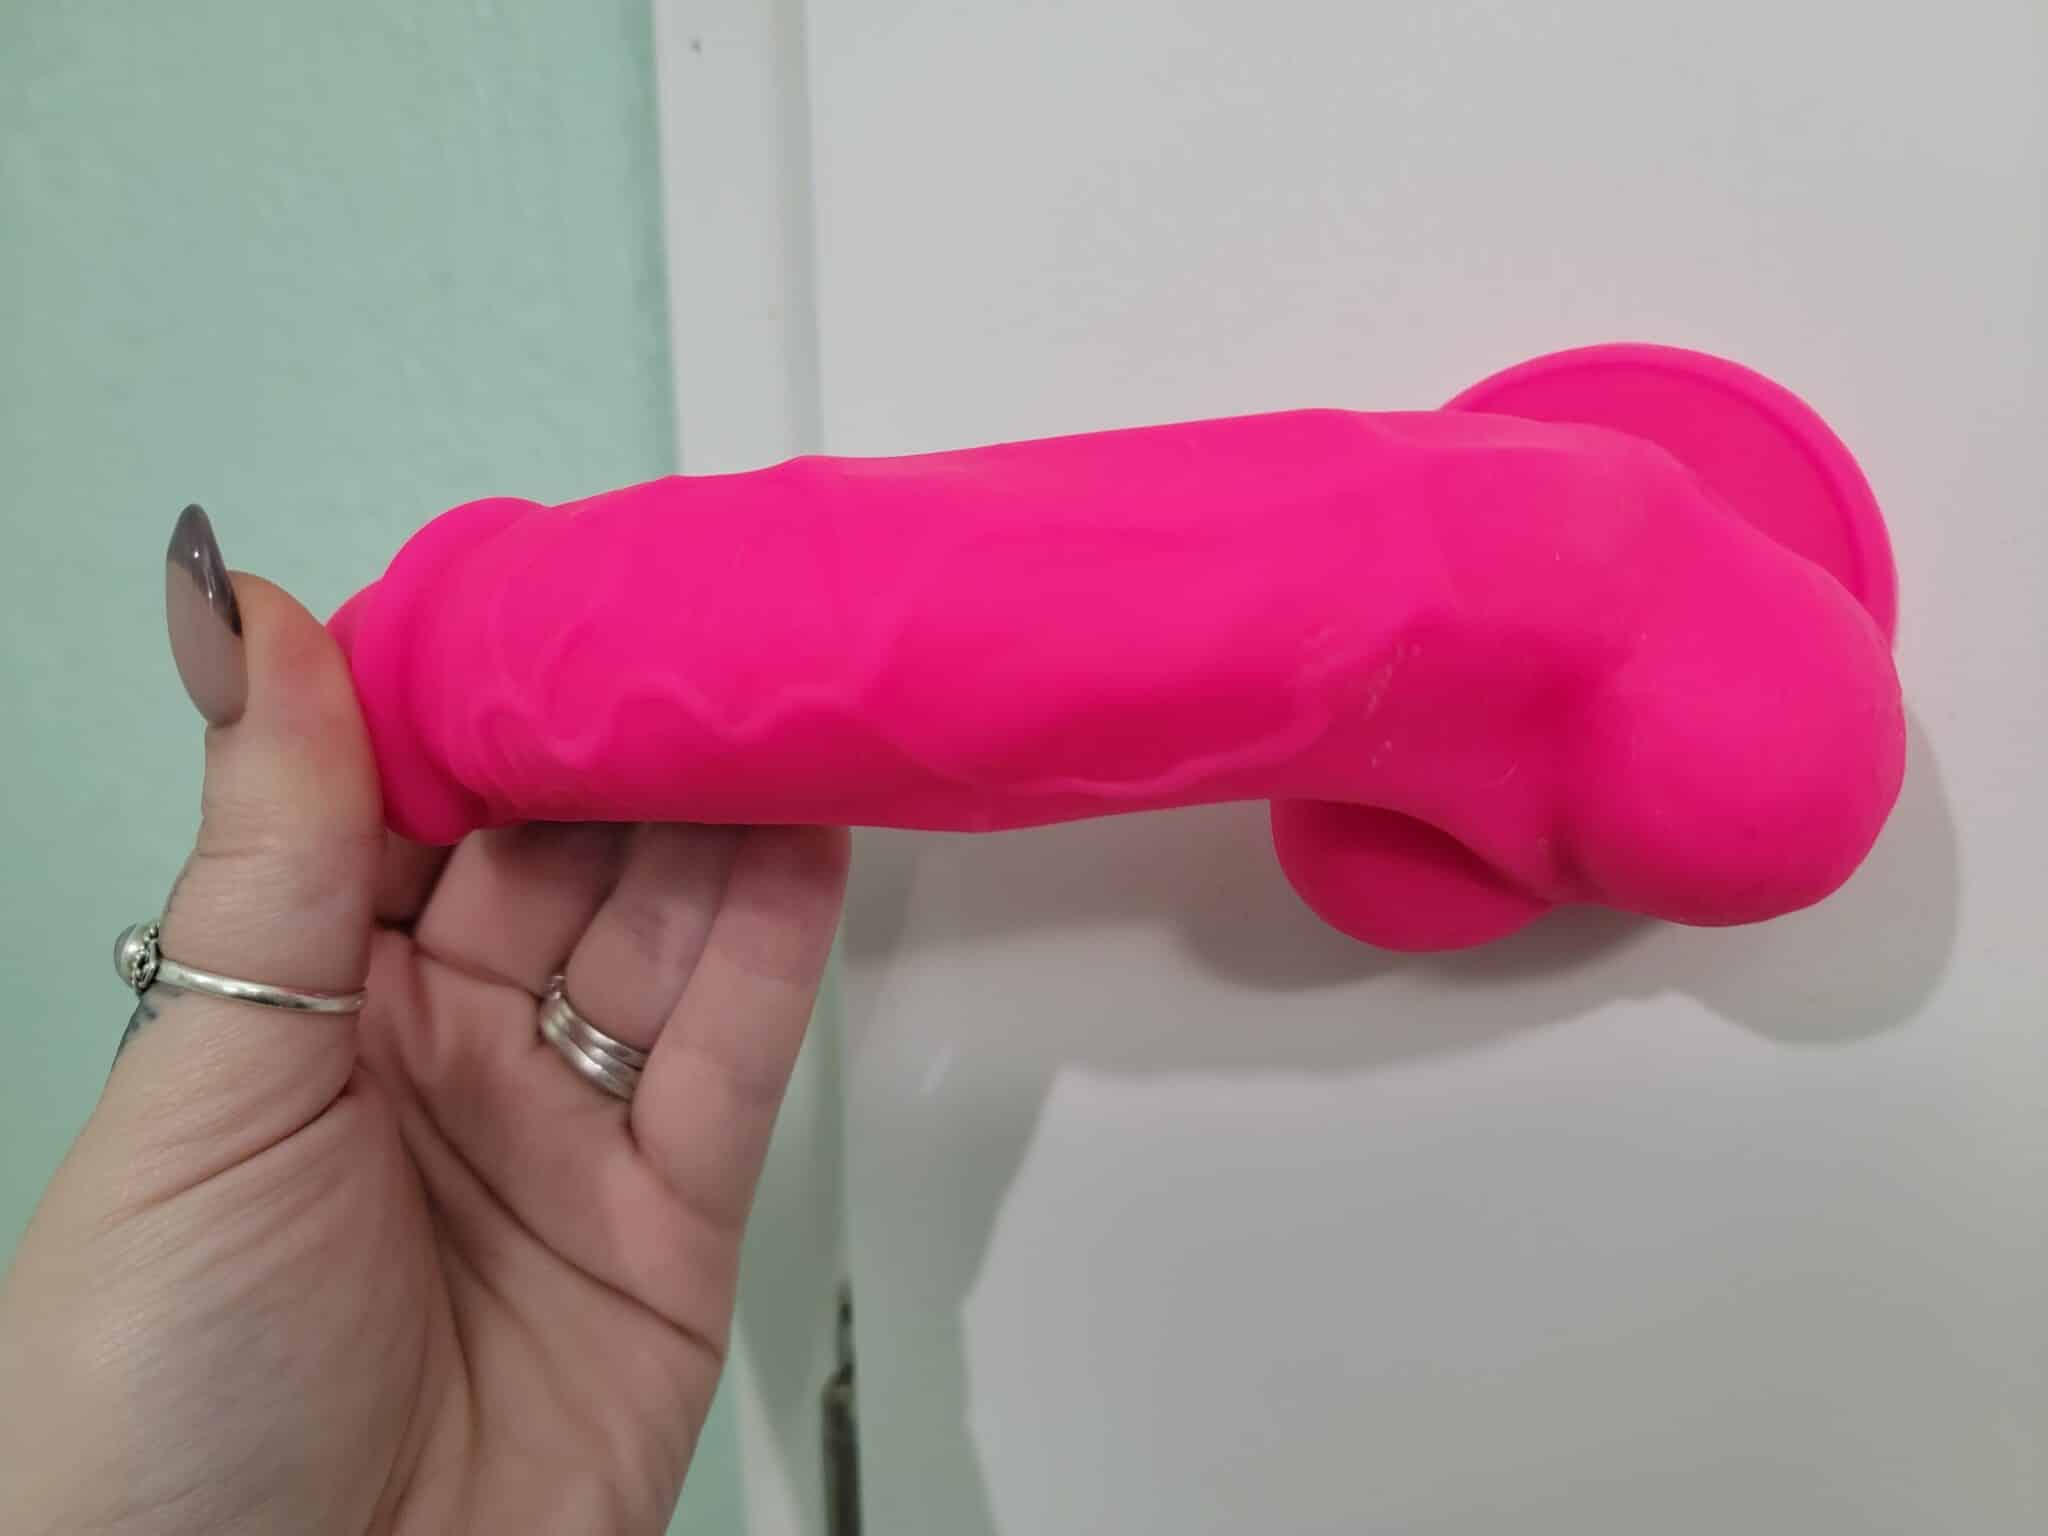 Colours Pleasures 5 Inch Dildo Does it Deliver on Performance?